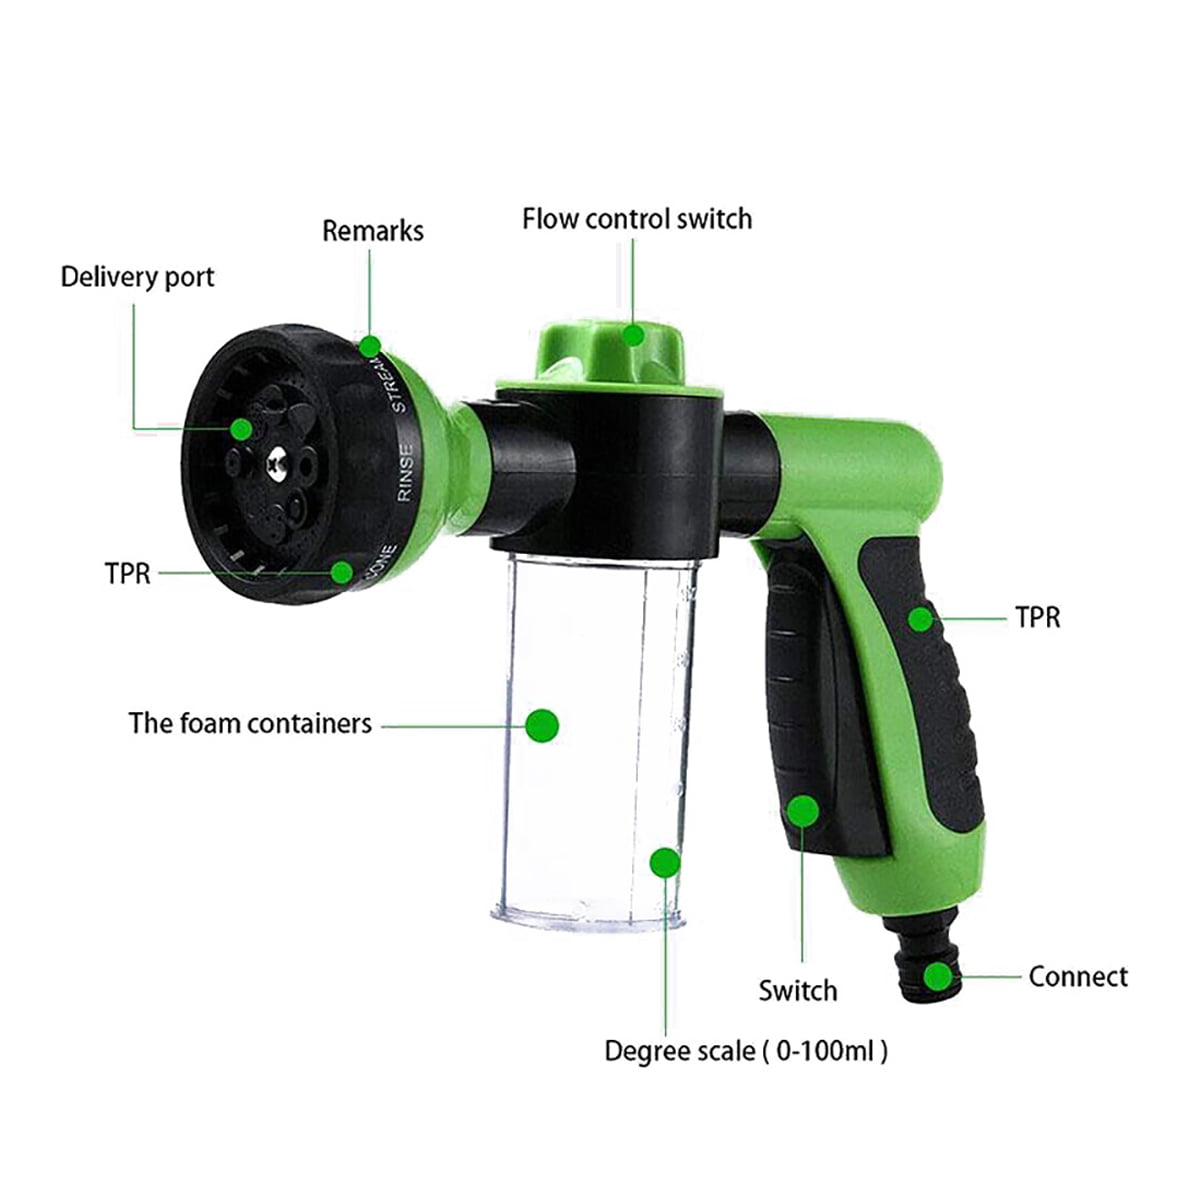 Top-Max Garden Hose Attachment Spray Gun Nozzle with Reservoir for Soap or Fertiliser - Jet Wash,Sprinkler Accessories - 8 Watering Modes,Water Pipe Sprayer Head with Dispenser